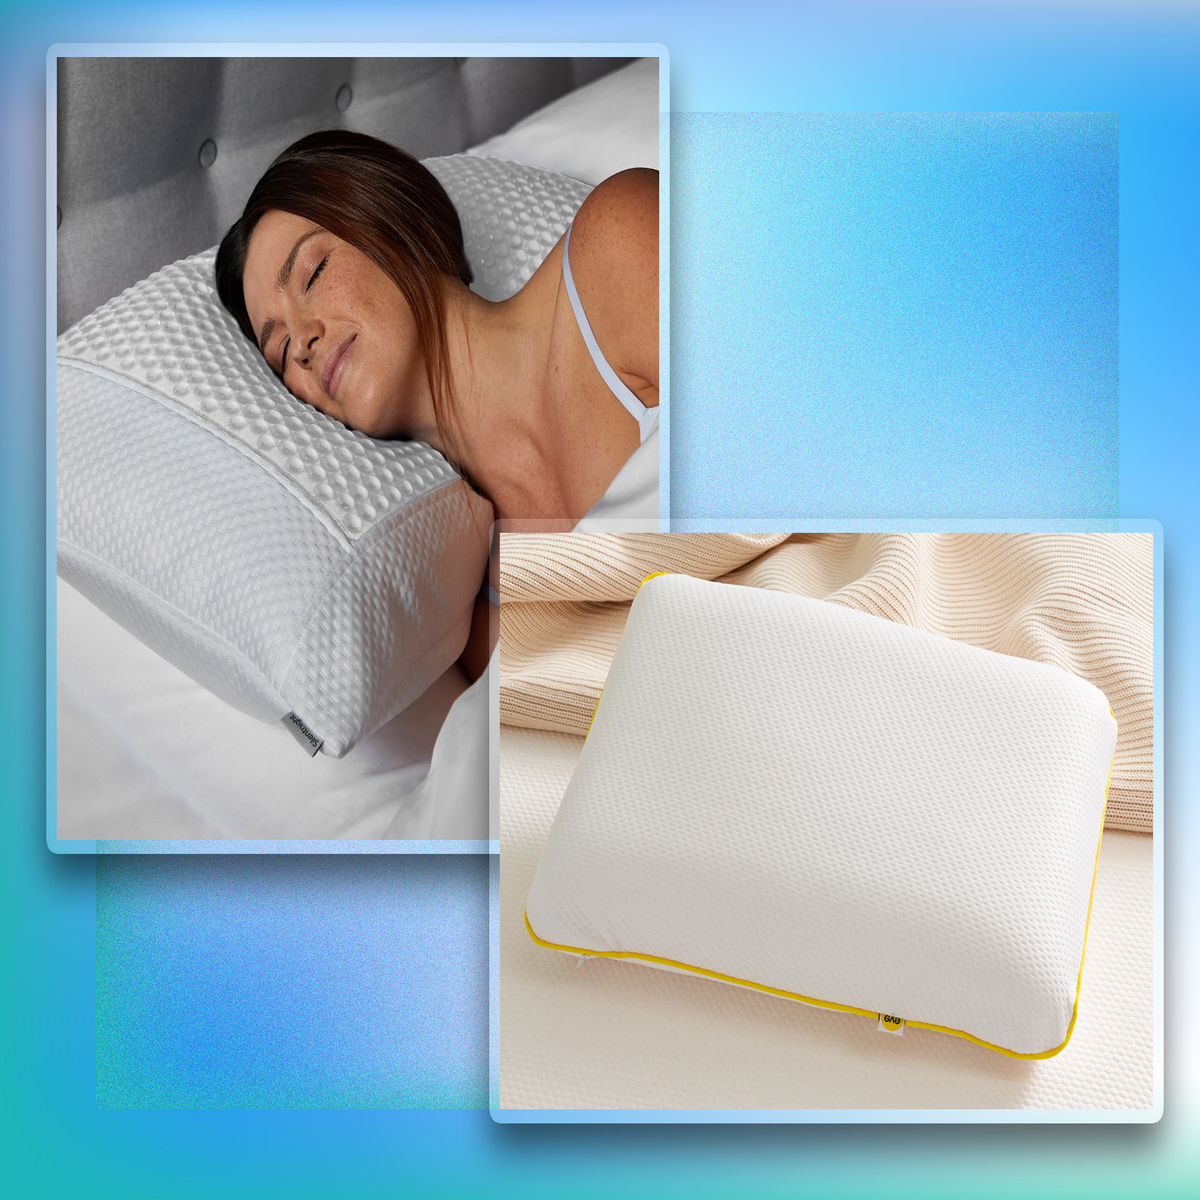 Ledgle Review: Wrap-around-the-neck Hug Light Reading Books In Bed